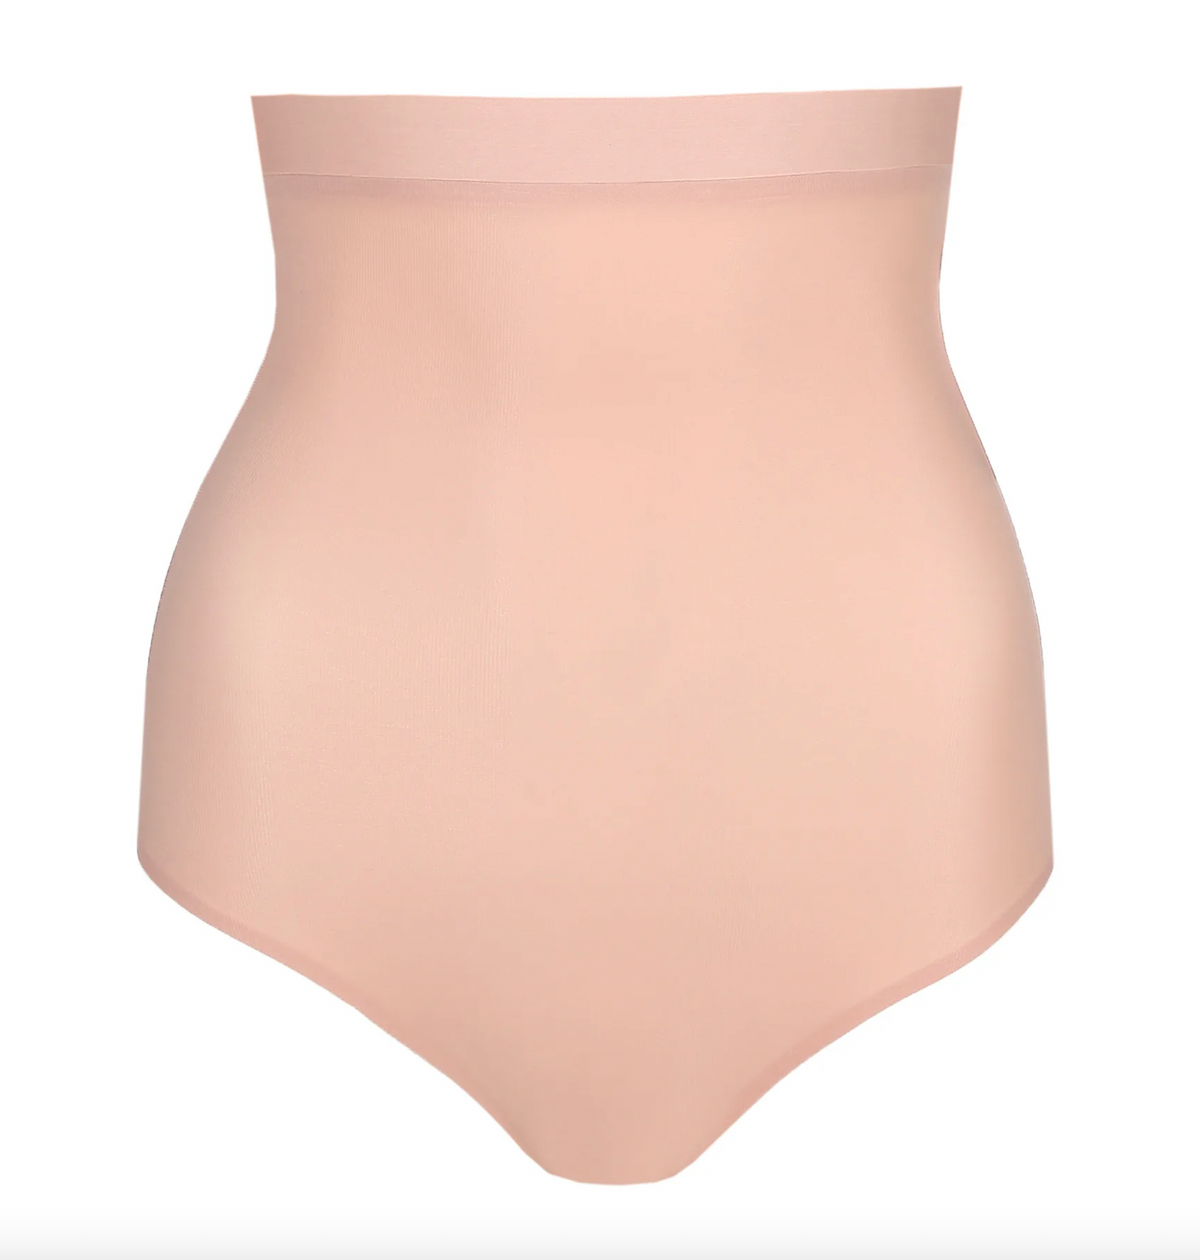 Brands - Naturana - Shapewear - Les Modes Ancora Inc. Now That's